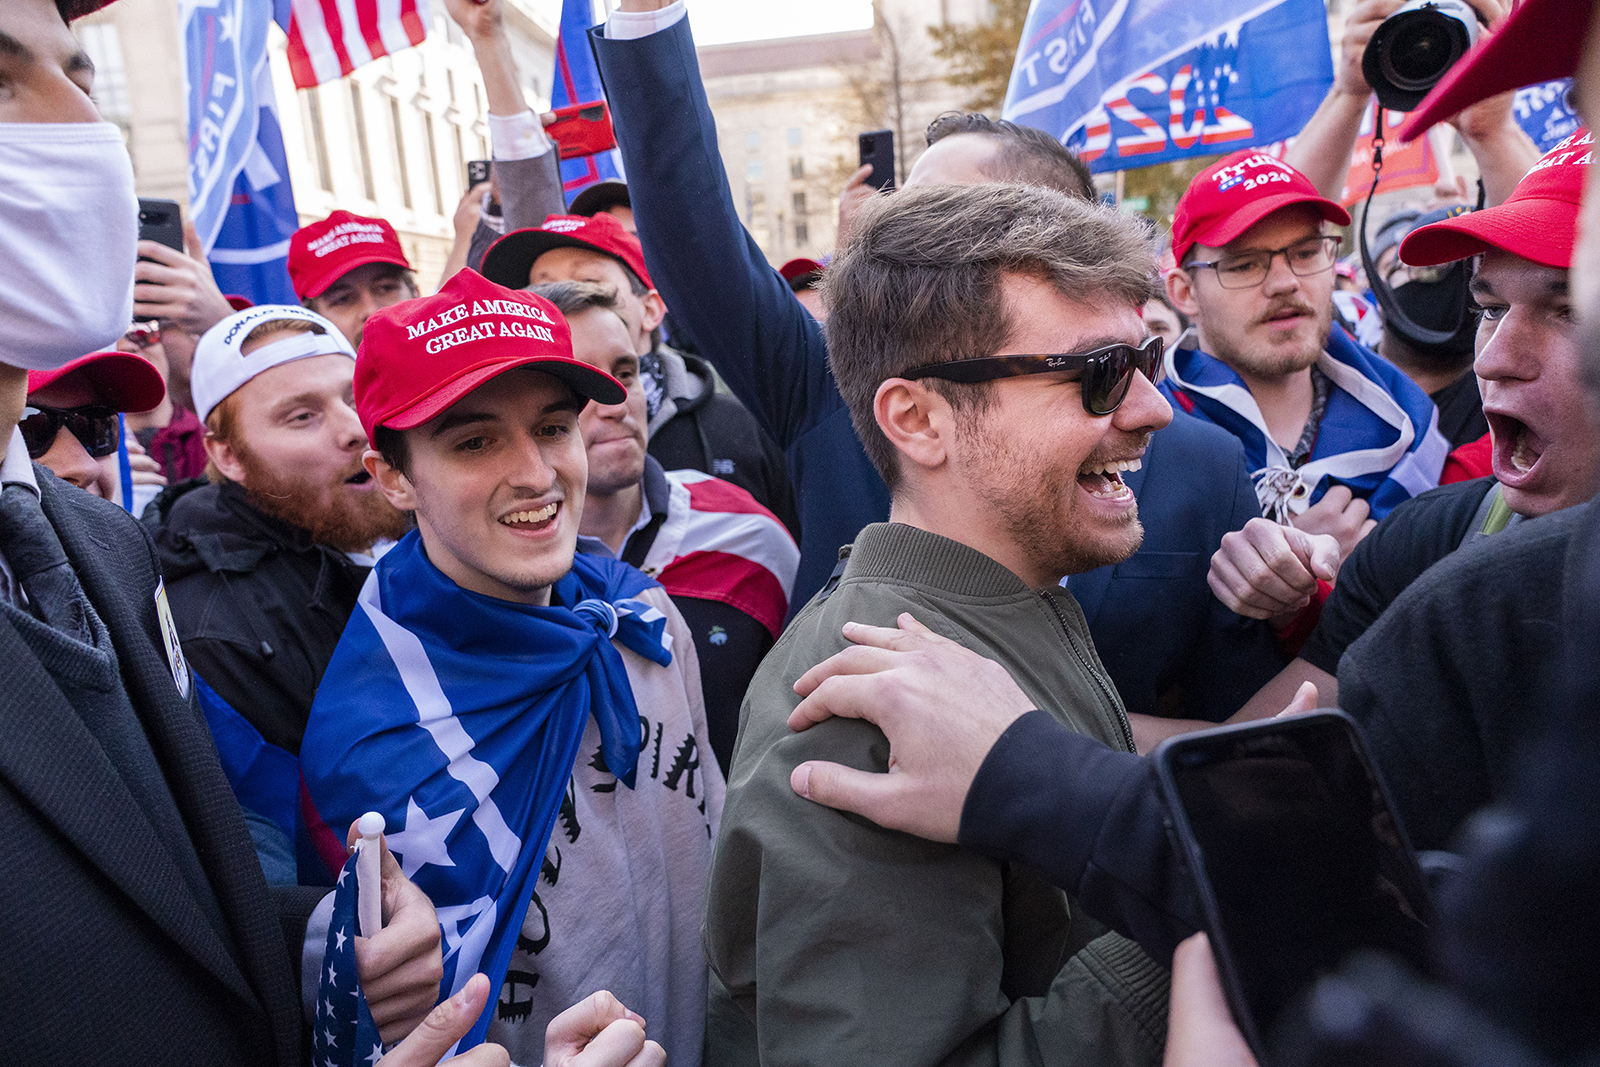 Nick Fuentes, center right in sunglasses, greets supporters before speaking at a pro-Trump march, Nov. 14, 2020, in Washington. Former President Donald Trump had dinner Nov. 22, 2022, at his Mar-a-Lago club with the rapper formerly known as Kanye West, who is now known as Ye, as well as Fuentes, who has used his online platform to spew antisemitic and white supremacist rhetoric.(AP Photo/Jacquelyn Martin, File)